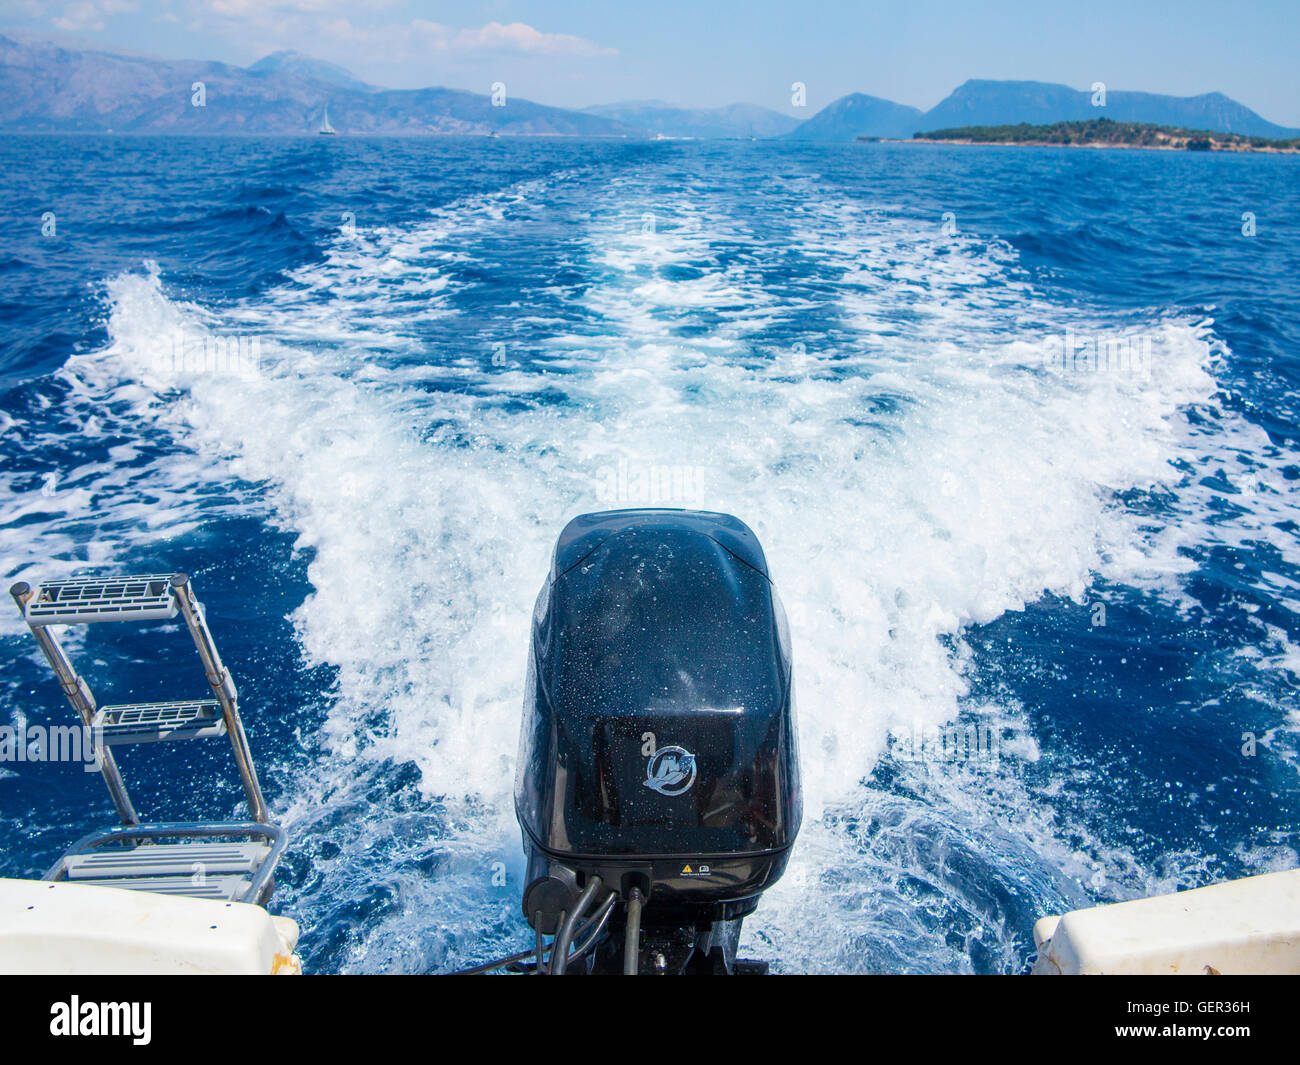 An outboard engine and it;s wake in a blue sea Stock Photo